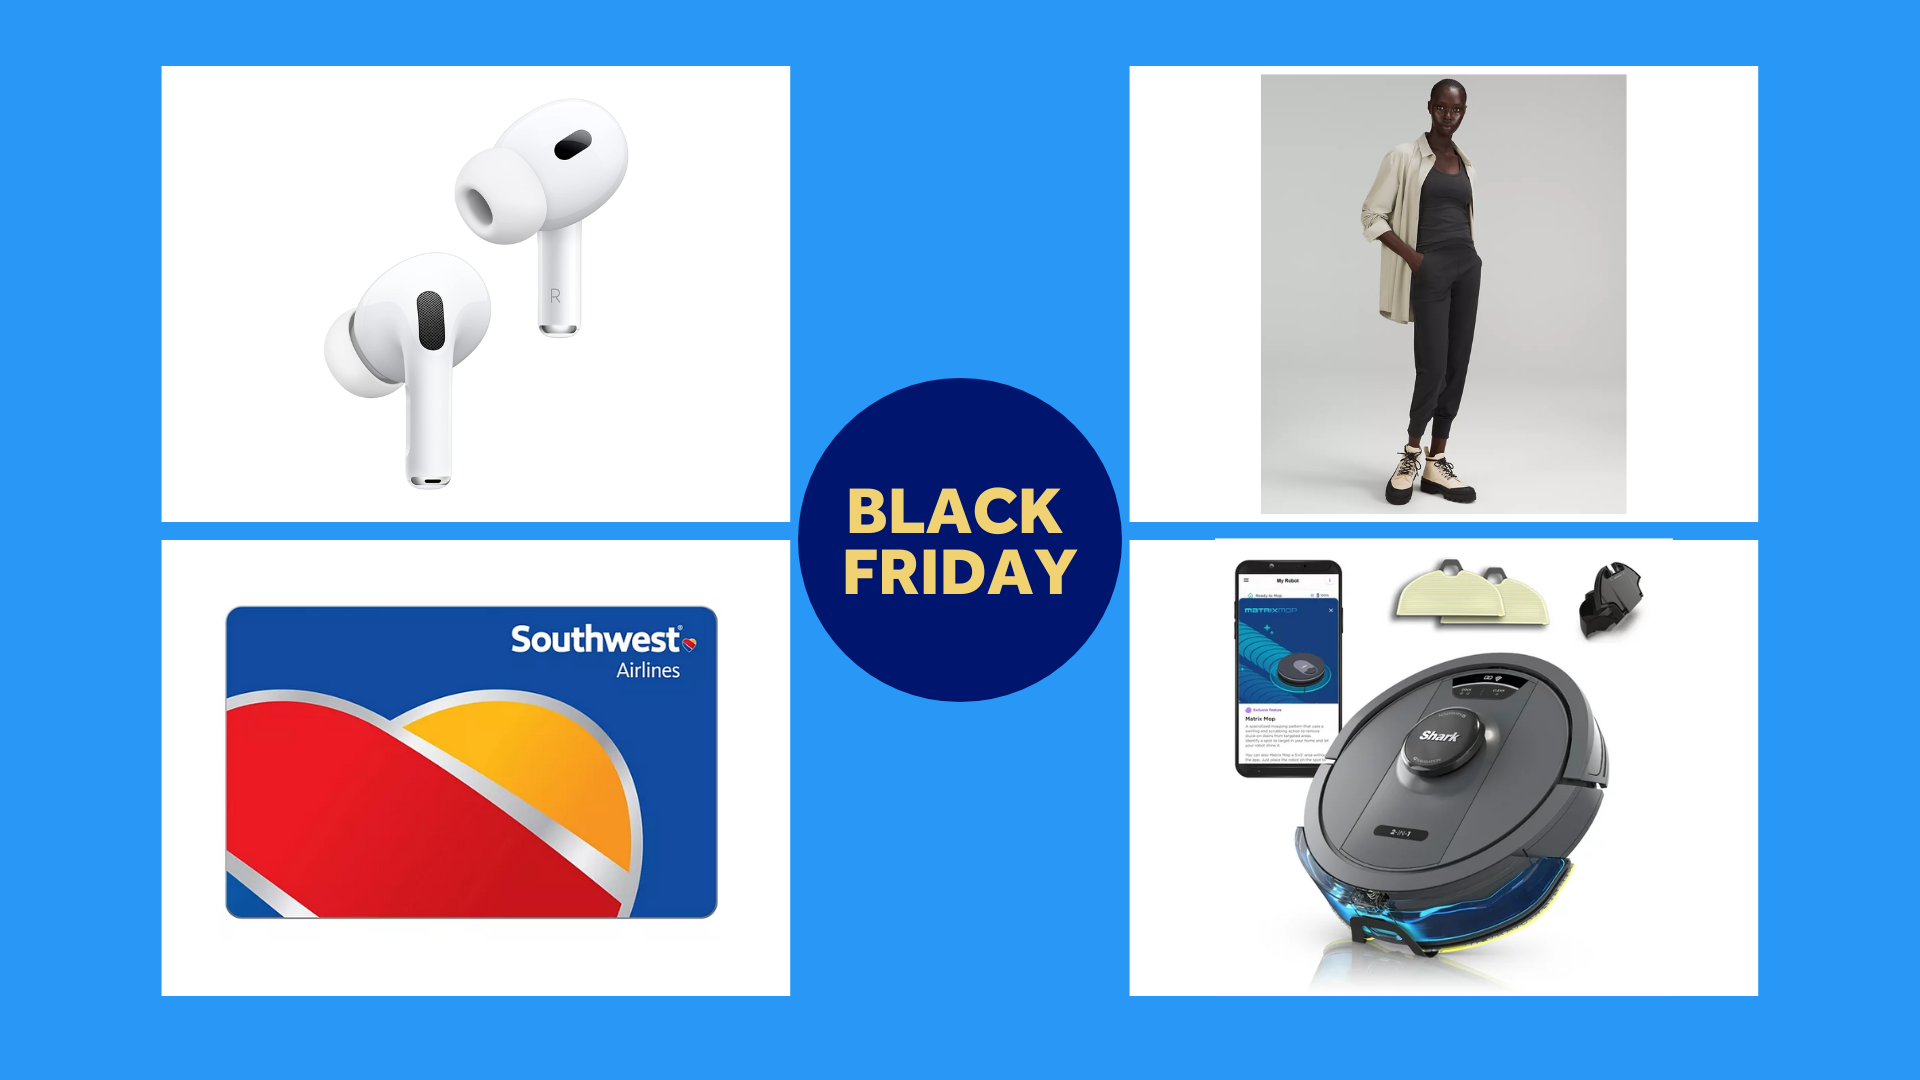 Early Black Friday deal: Save up to $40 on Ninja products at Best Buy